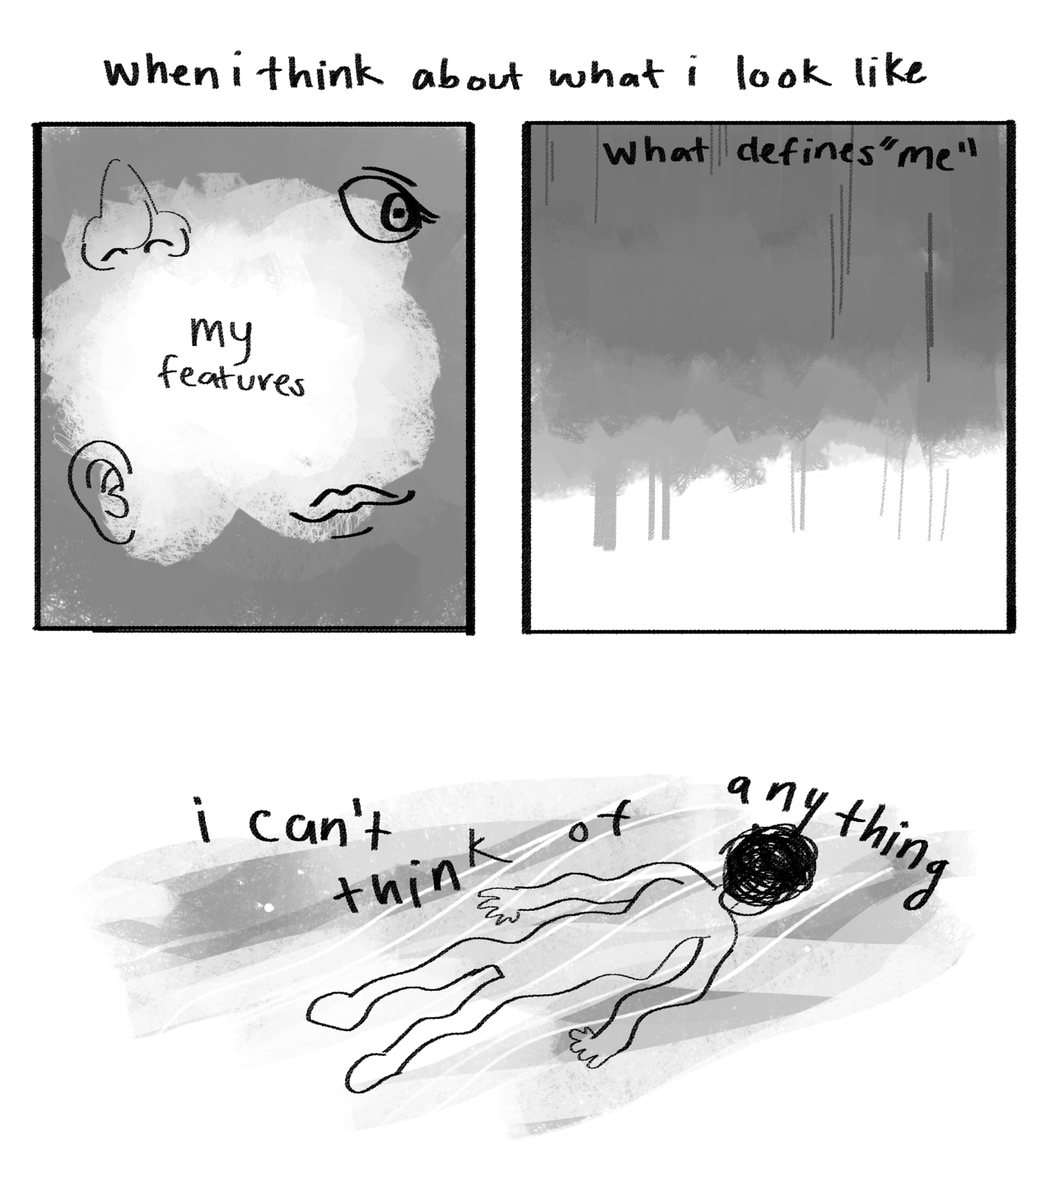 tw depression

quick vent comic thread about how my depression has affected me. (1/5) 